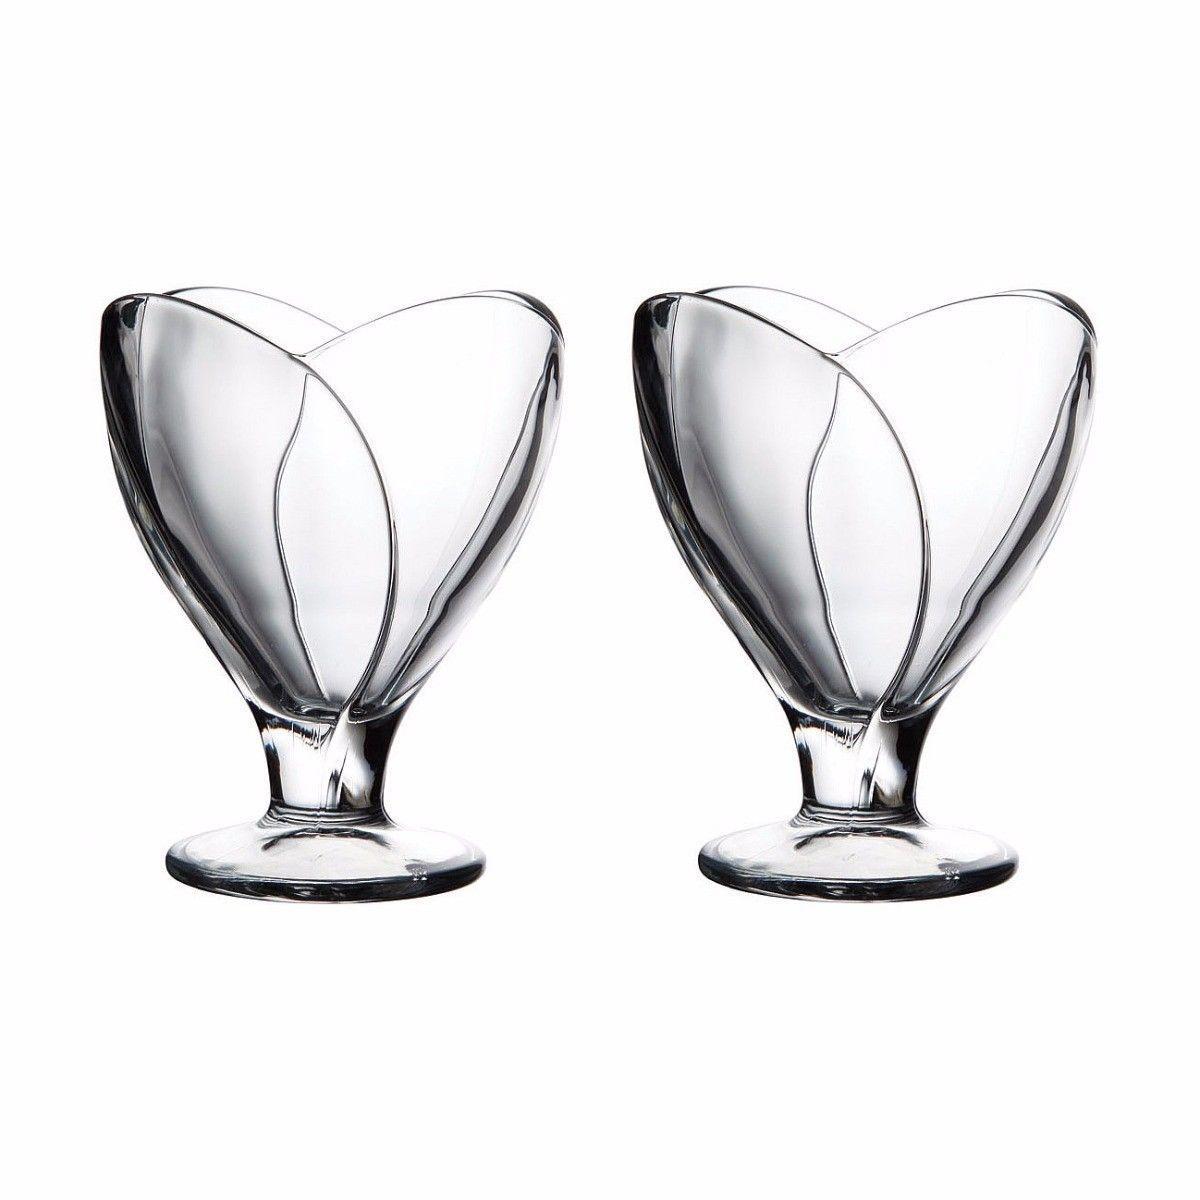 PB Fancy Glassware High Quality Iceville Ice Cream Vase Cup 2 Pack Glassware Home 51638 (Parcel Rate)